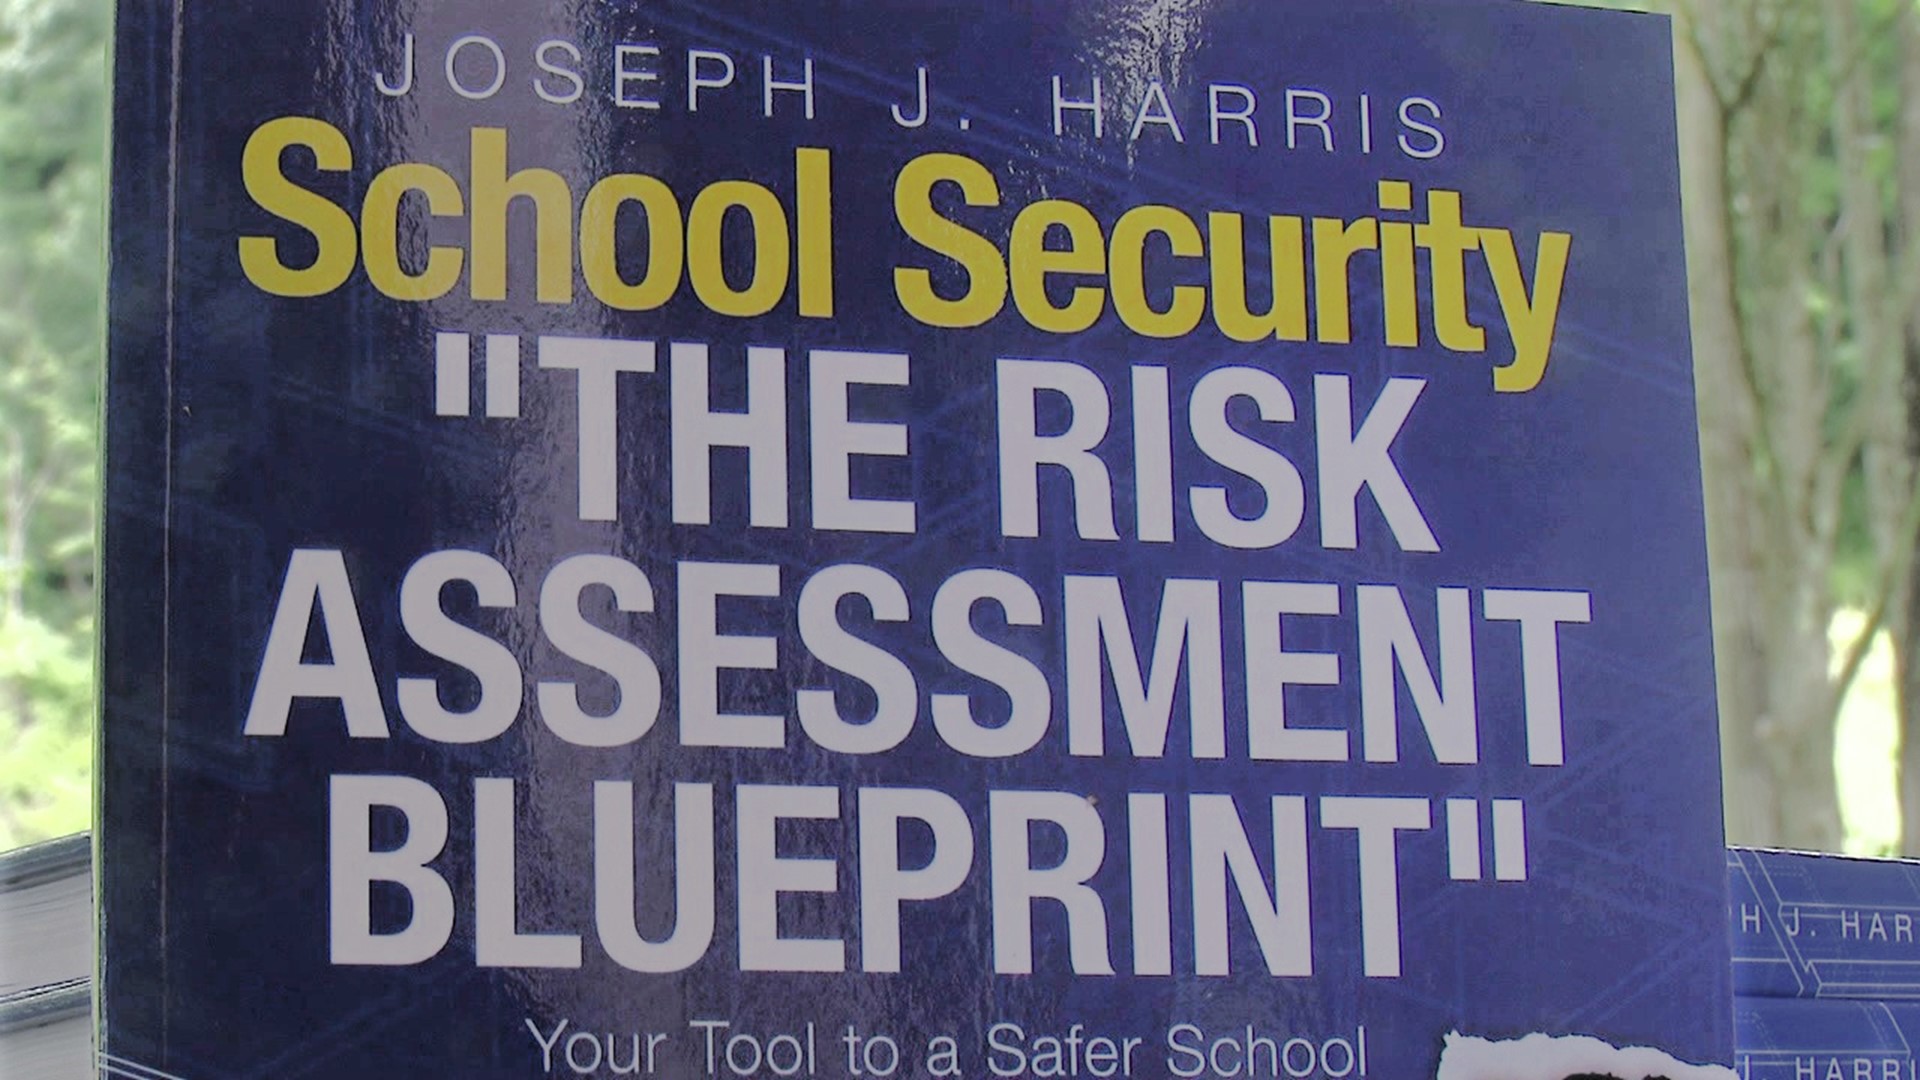 Former Scranton police officer publishes book on school security.